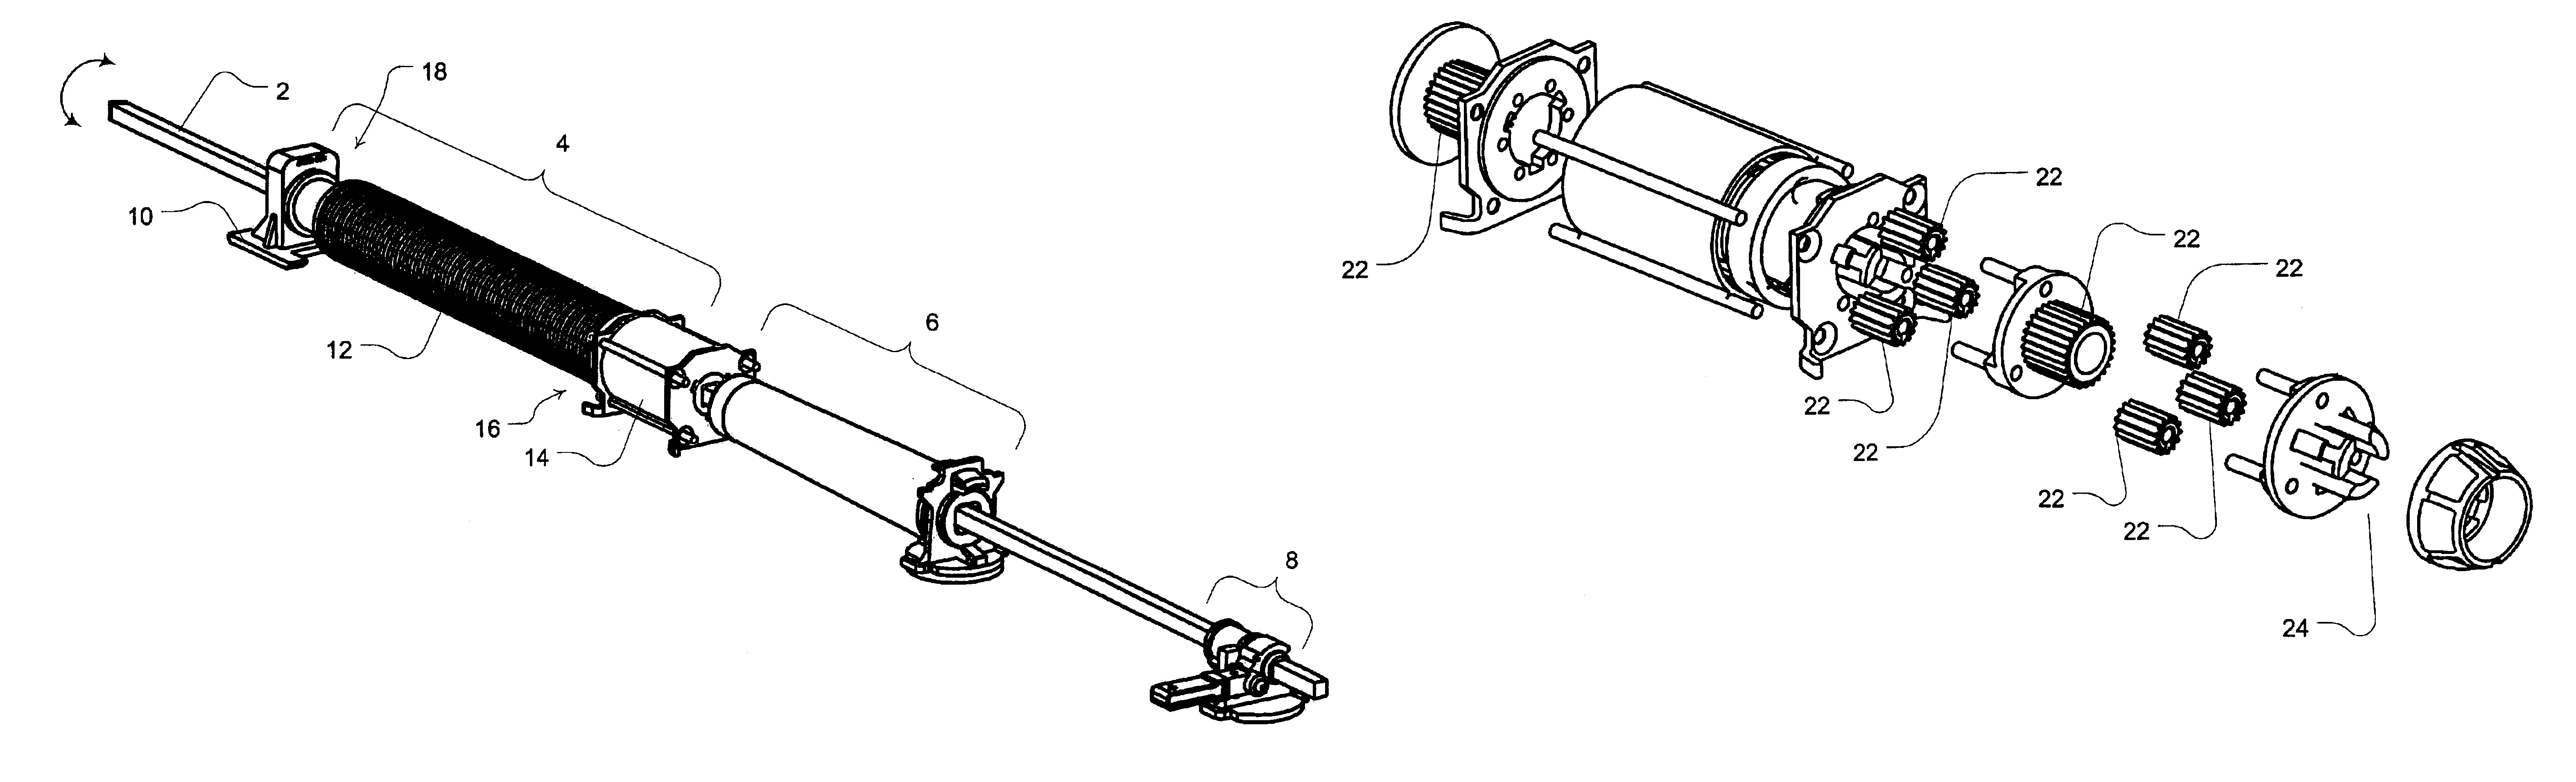 Semi-cordless unbalanced spring driven blind system and methods for adjusting and making same